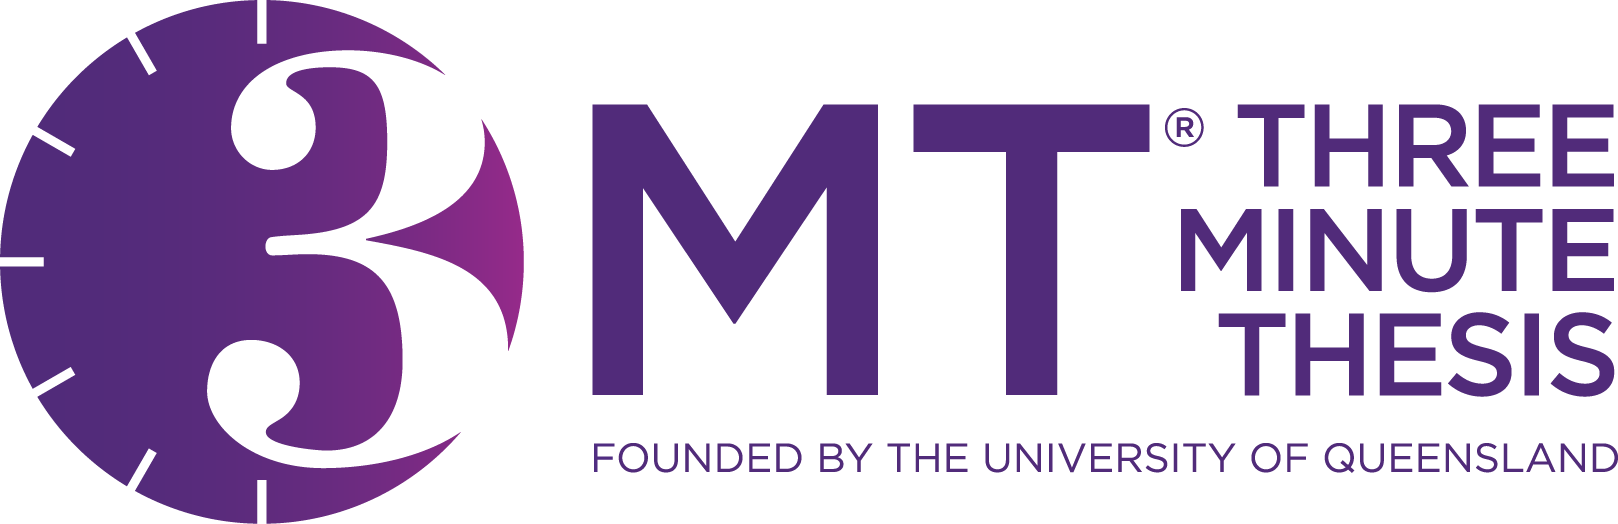 Three minute thesis official logo.